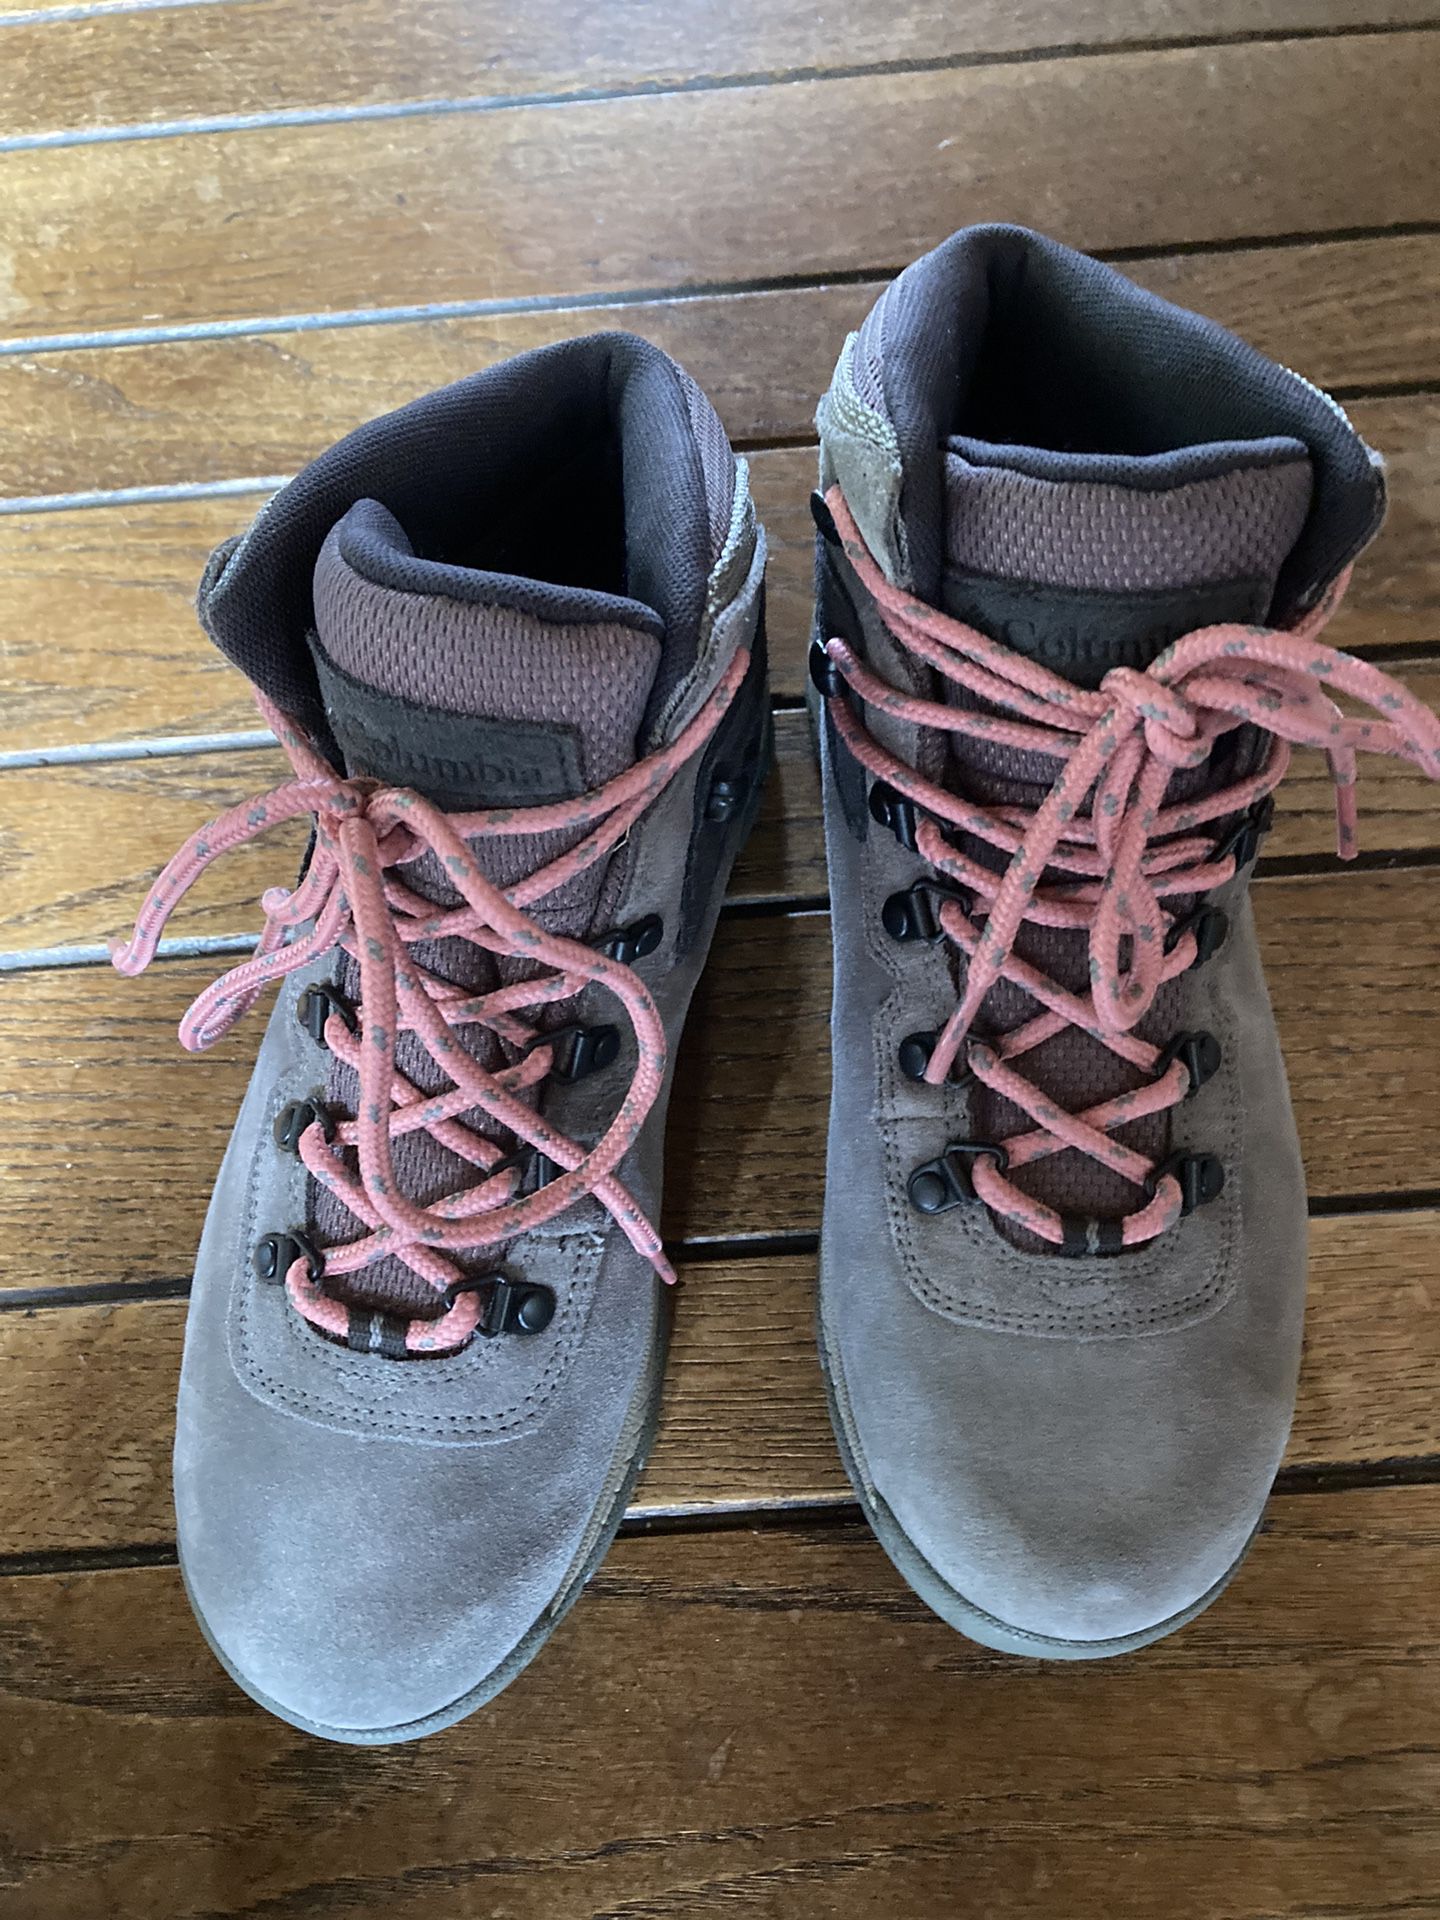 Columbia Stratus/ Rose Women’s Hiking Boots, Size 7.5